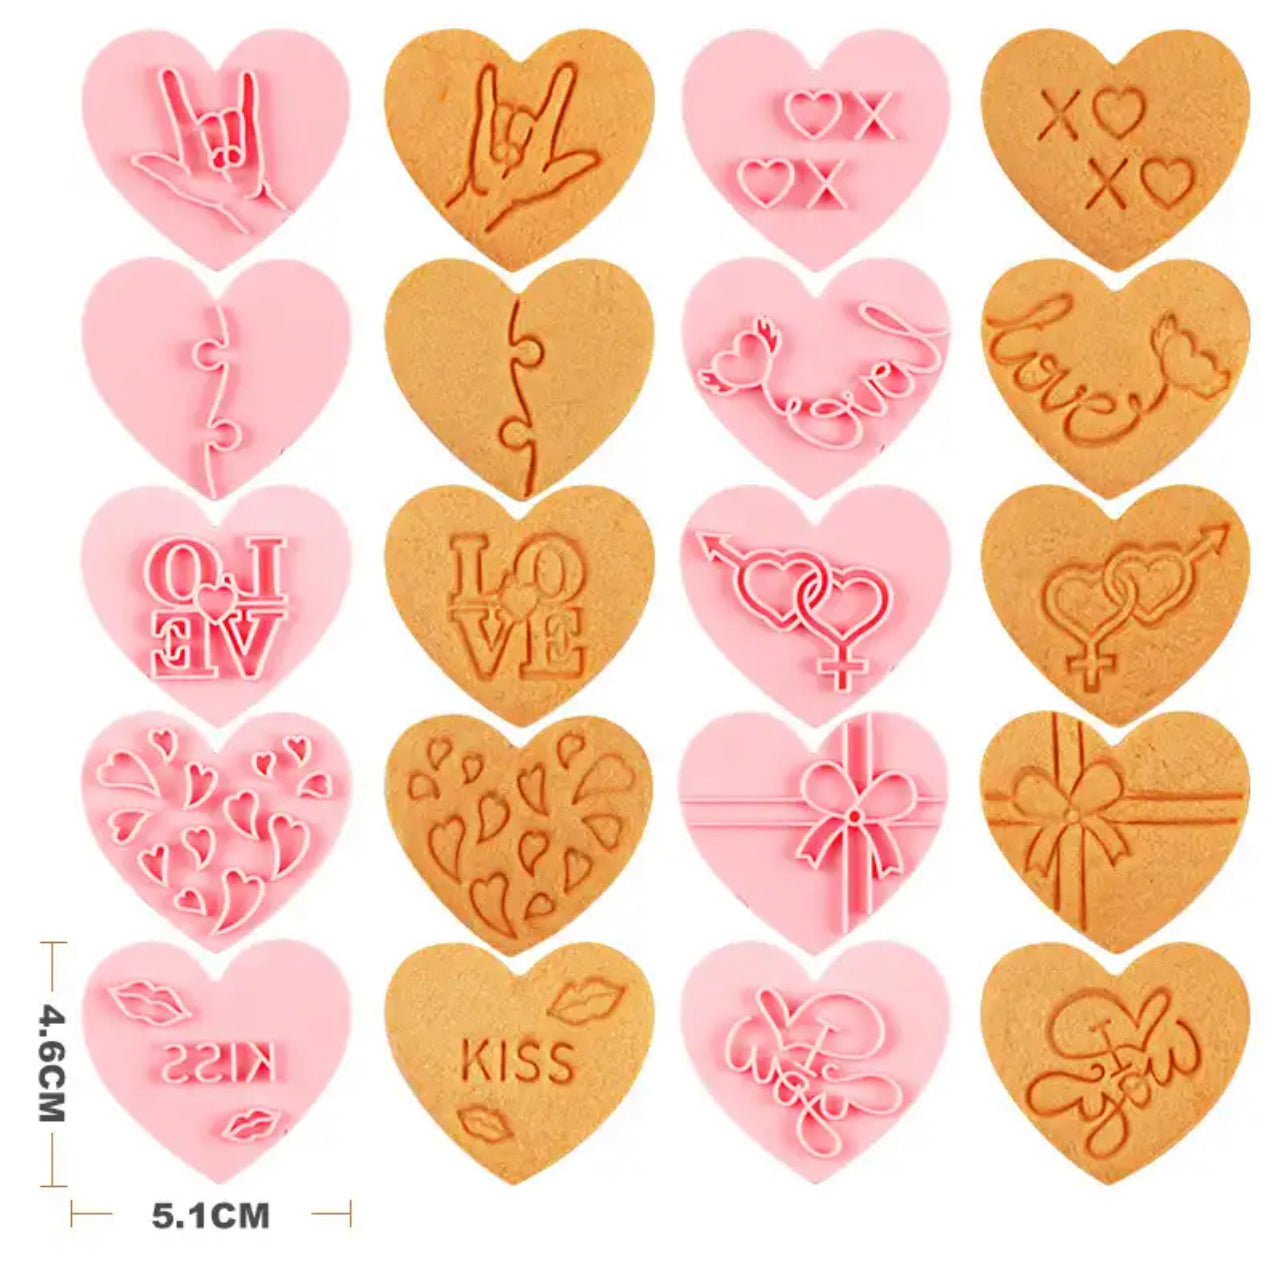 10 piece Valentine’s Day heart shaped stamps